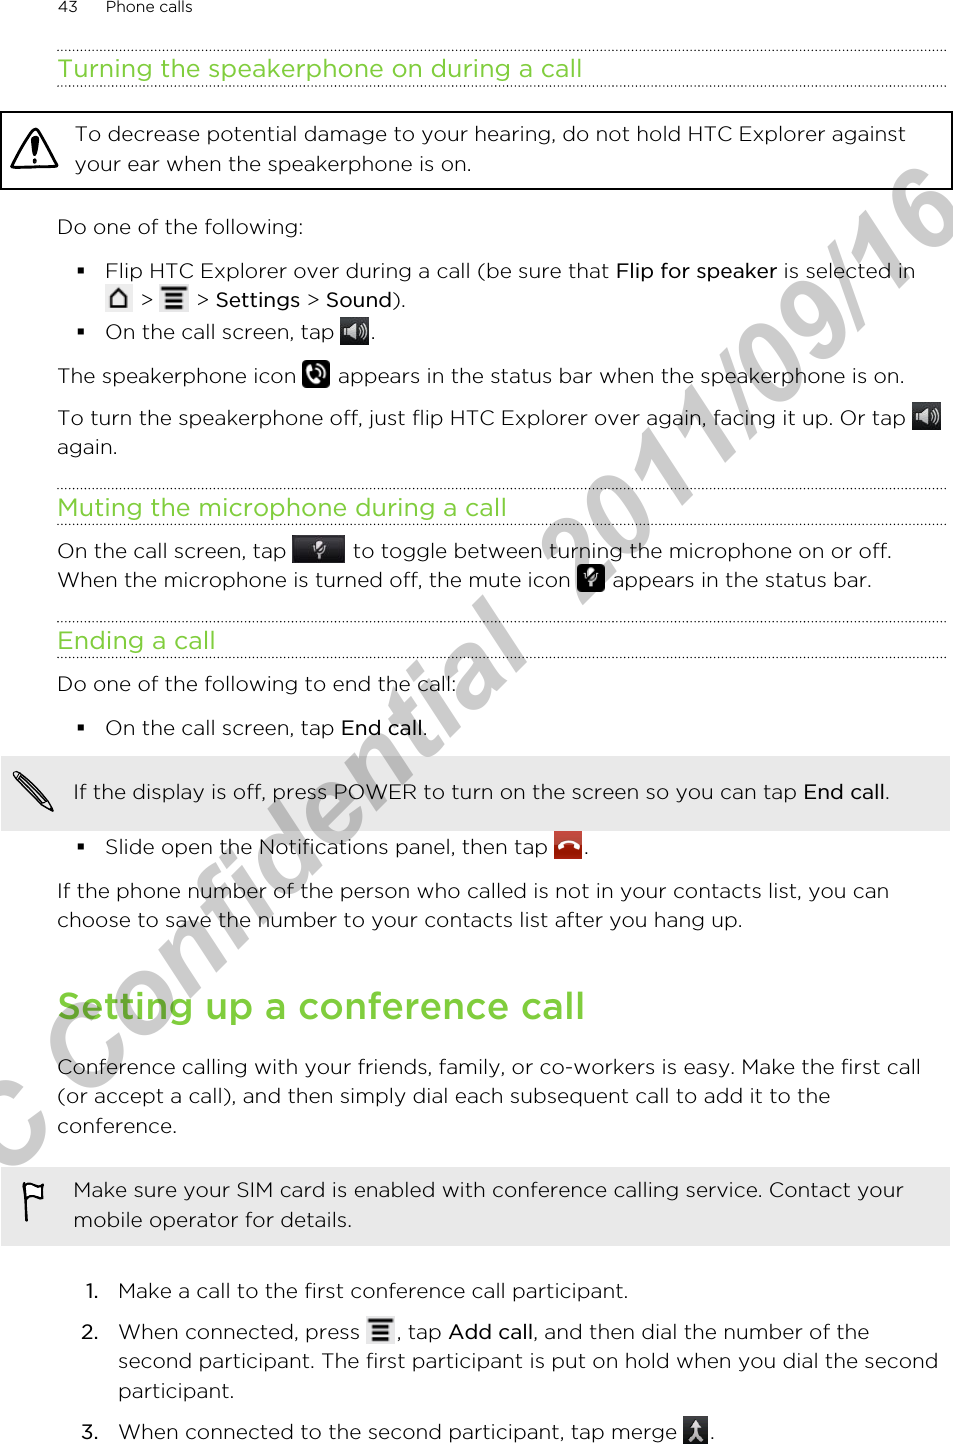 Turning the speakerphone on during a callTo decrease potential damage to your hearing, do not hold HTC Explorer againstyour ear when the speakerphone is on.Do one of the following:§Flip HTC Explorer over during a call (be sure that Flip for speaker is selected in &gt;   &gt; Settings &gt; Sound).§On the call screen, tap  .The speakerphone icon   appears in the status bar when the speakerphone is on.To turn the speakerphone off, just flip HTC Explorer over again, facing it up. Or tap again.Muting the microphone during a callOn the call screen, tap   to toggle between turning the microphone on or off.When the microphone is turned off, the mute icon   appears in the status bar.Ending a callDo one of the following to end the call:§On the call screen, tap End call.If the display is off, press POWER to turn on the screen so you can tap End call.§Slide open the Notifications panel, then tap  .If the phone number of the person who called is not in your contacts list, you canchoose to save the number to your contacts list after you hang up.Setting up a conference callConference calling with your friends, family, or co-workers is easy. Make the first call(or accept a call), and then simply dial each subsequent call to add it to theconference.Make sure your SIM card is enabled with conference calling service. Contact yourmobile operator for details.1. Make a call to the first conference call participant.2. When connected, press  , tap Add call, and then dial the number of thesecond participant. The first participant is put on hold when you dial the secondparticipant.3. When connected to the second participant, tap merge  .43 Phone callsHTC Confidential  2011/09/16 